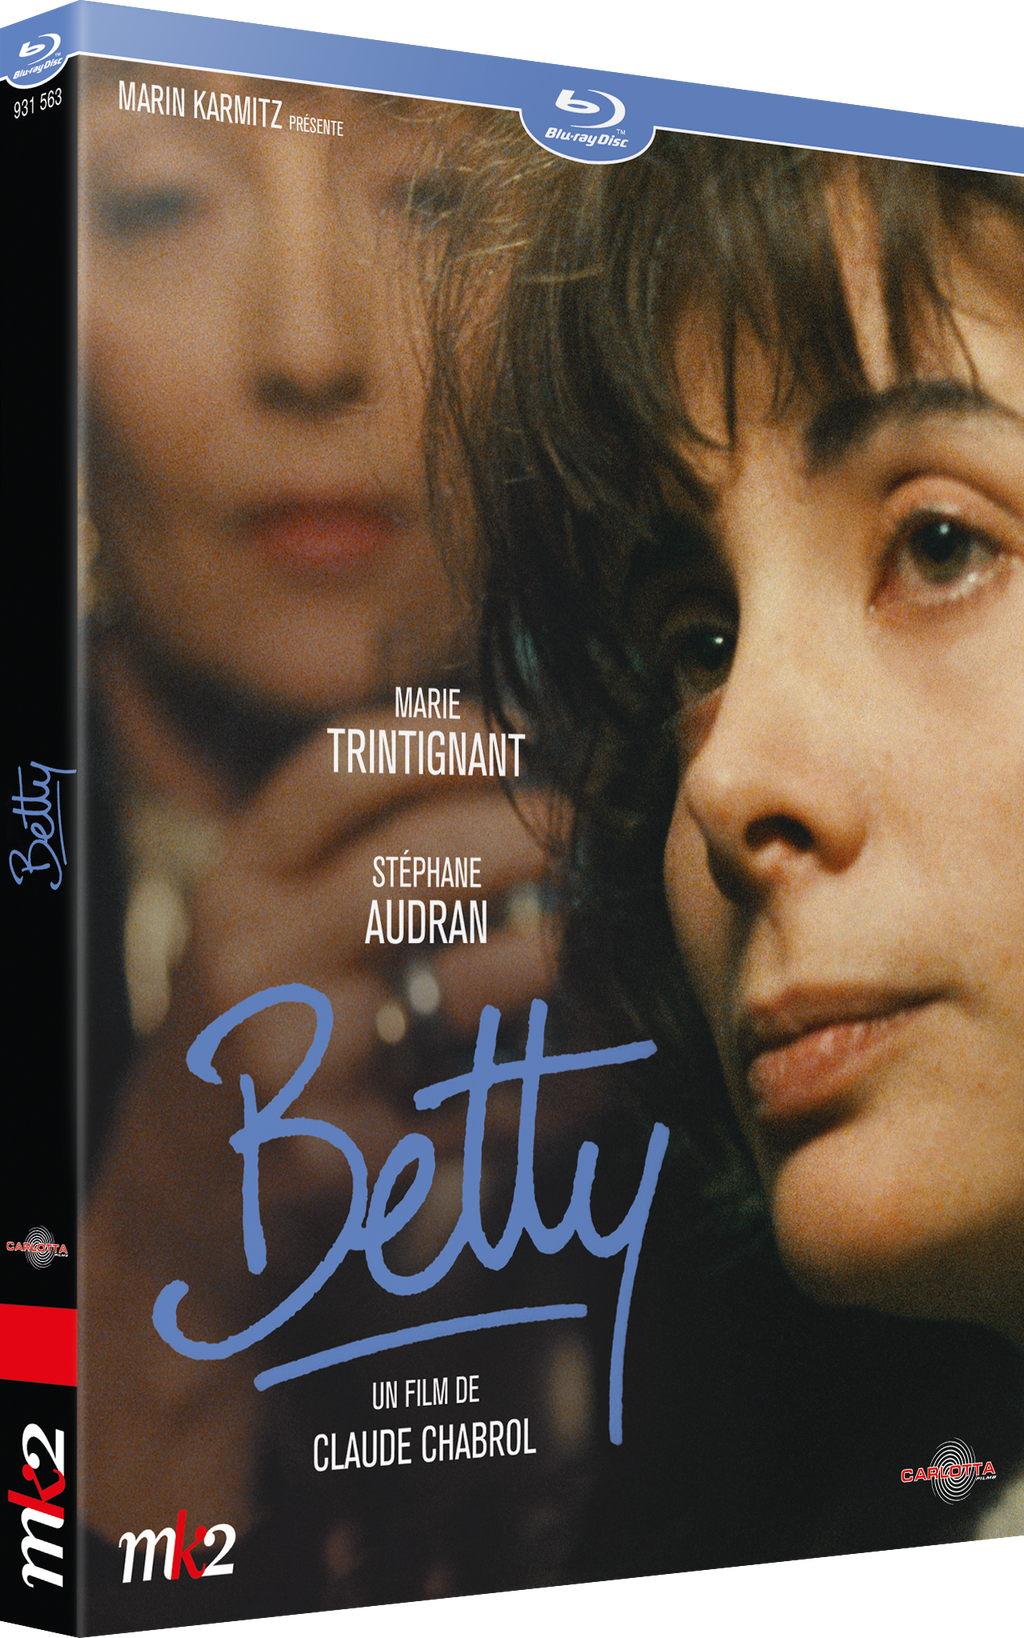 Betty by Claude Chabrol